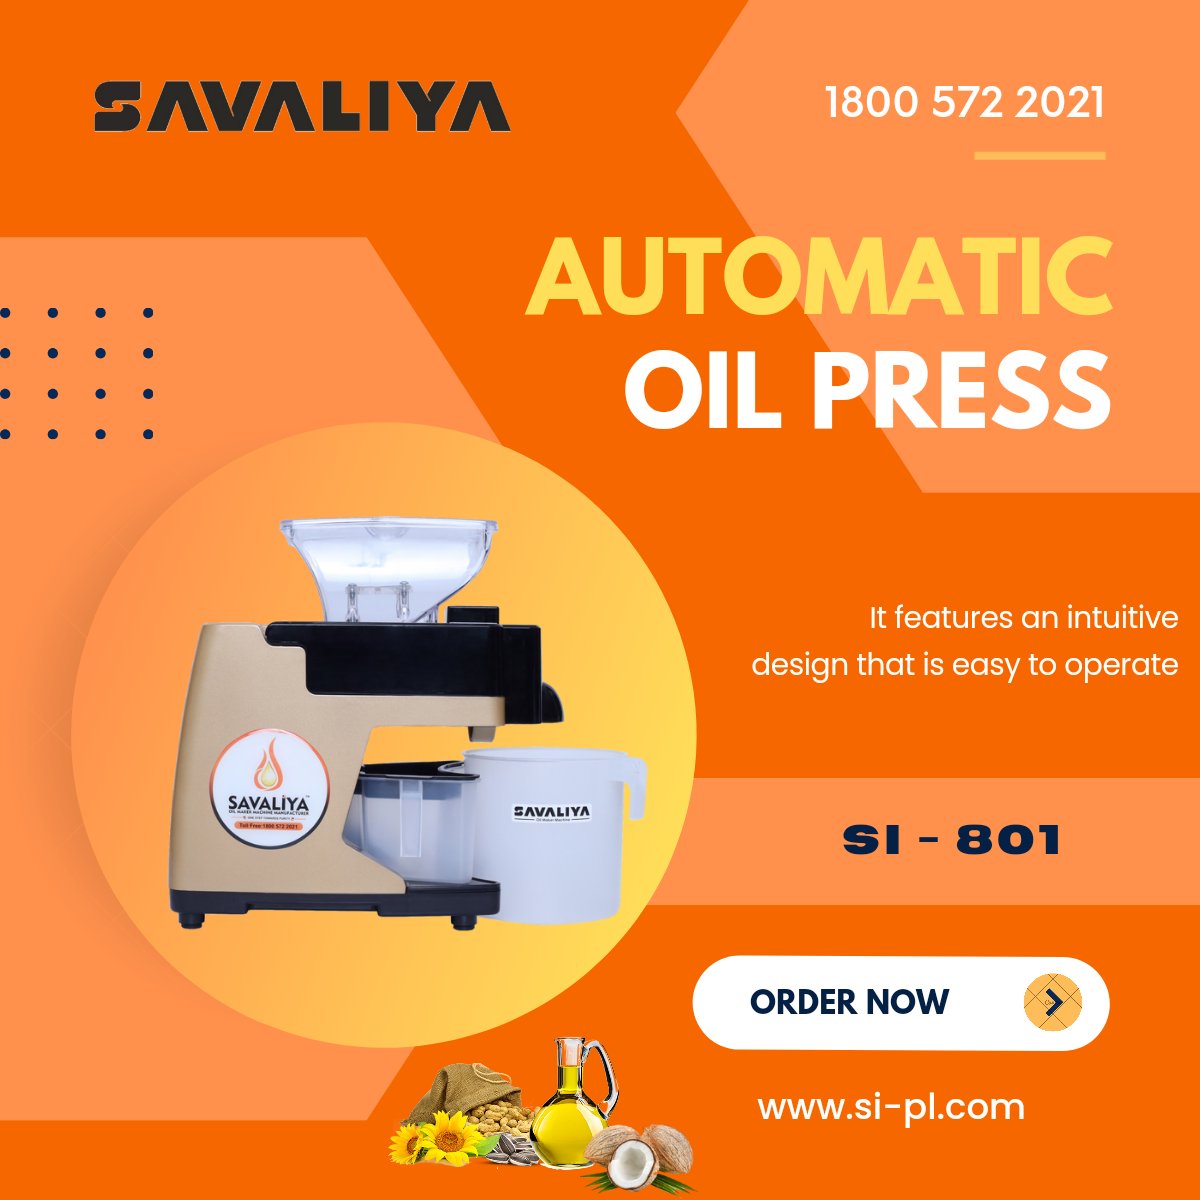 It features an intuitive design that is easy to operate, making it suitable for both commercial and home use.

  #savaliyaoilmakermachine  #oilmakermachine #oilpressmachine #oilextractionmachine #oilexpeller #OilMakingMachine #oilpress #coldpressoilmachine #coldpressed #peanutoil